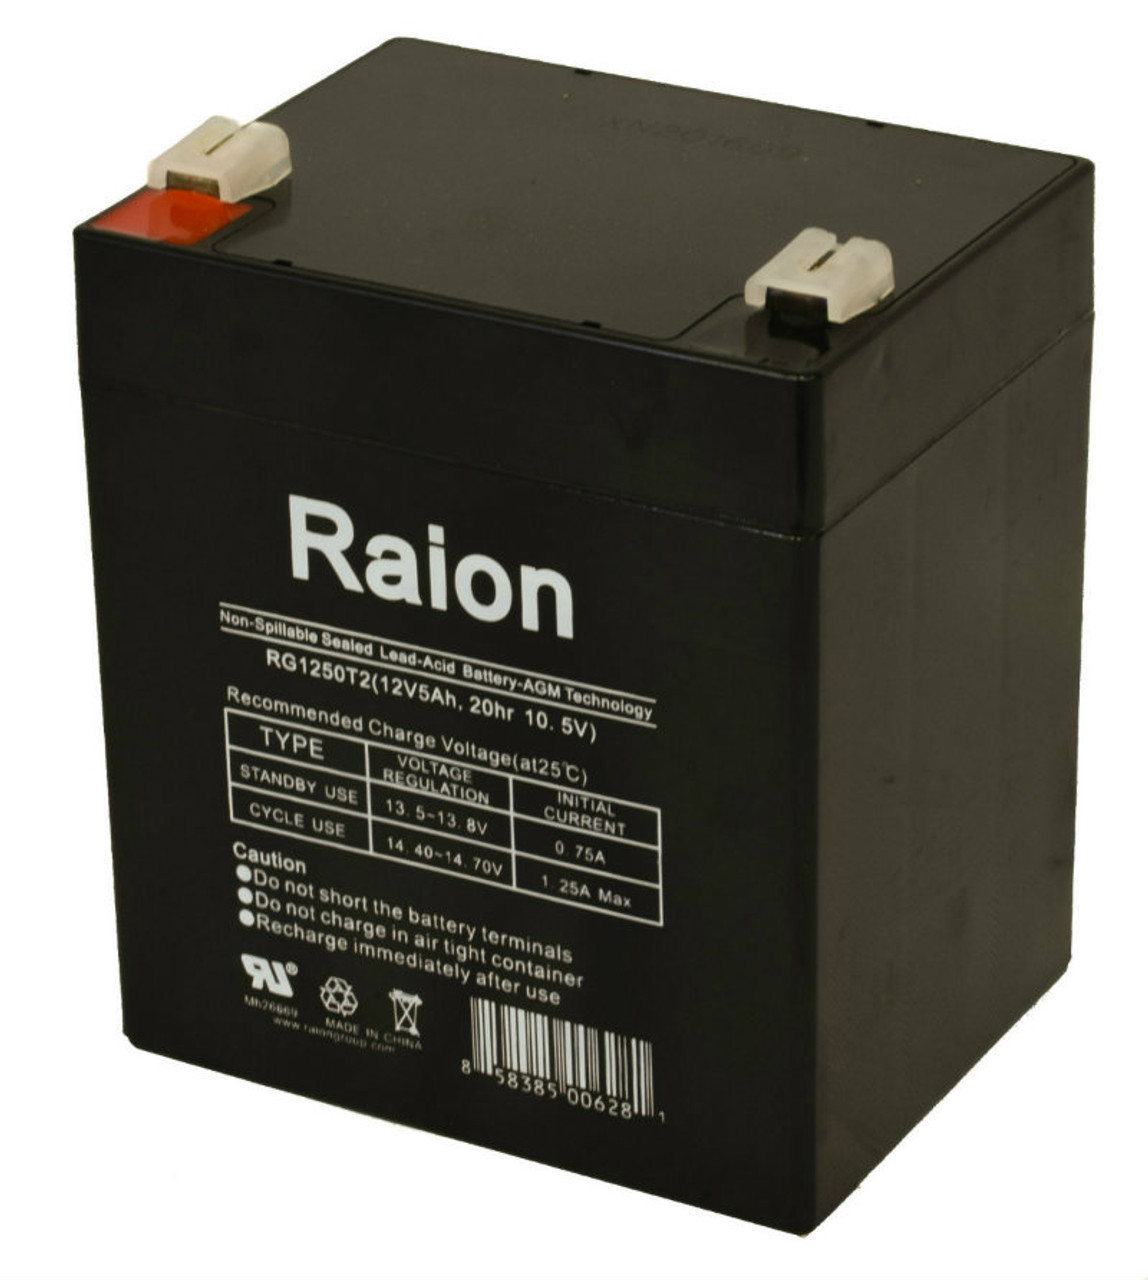 Raion Power 12V 5Ah Replacement Fire Alarm Control Panel Battery for Digital Security PC2500